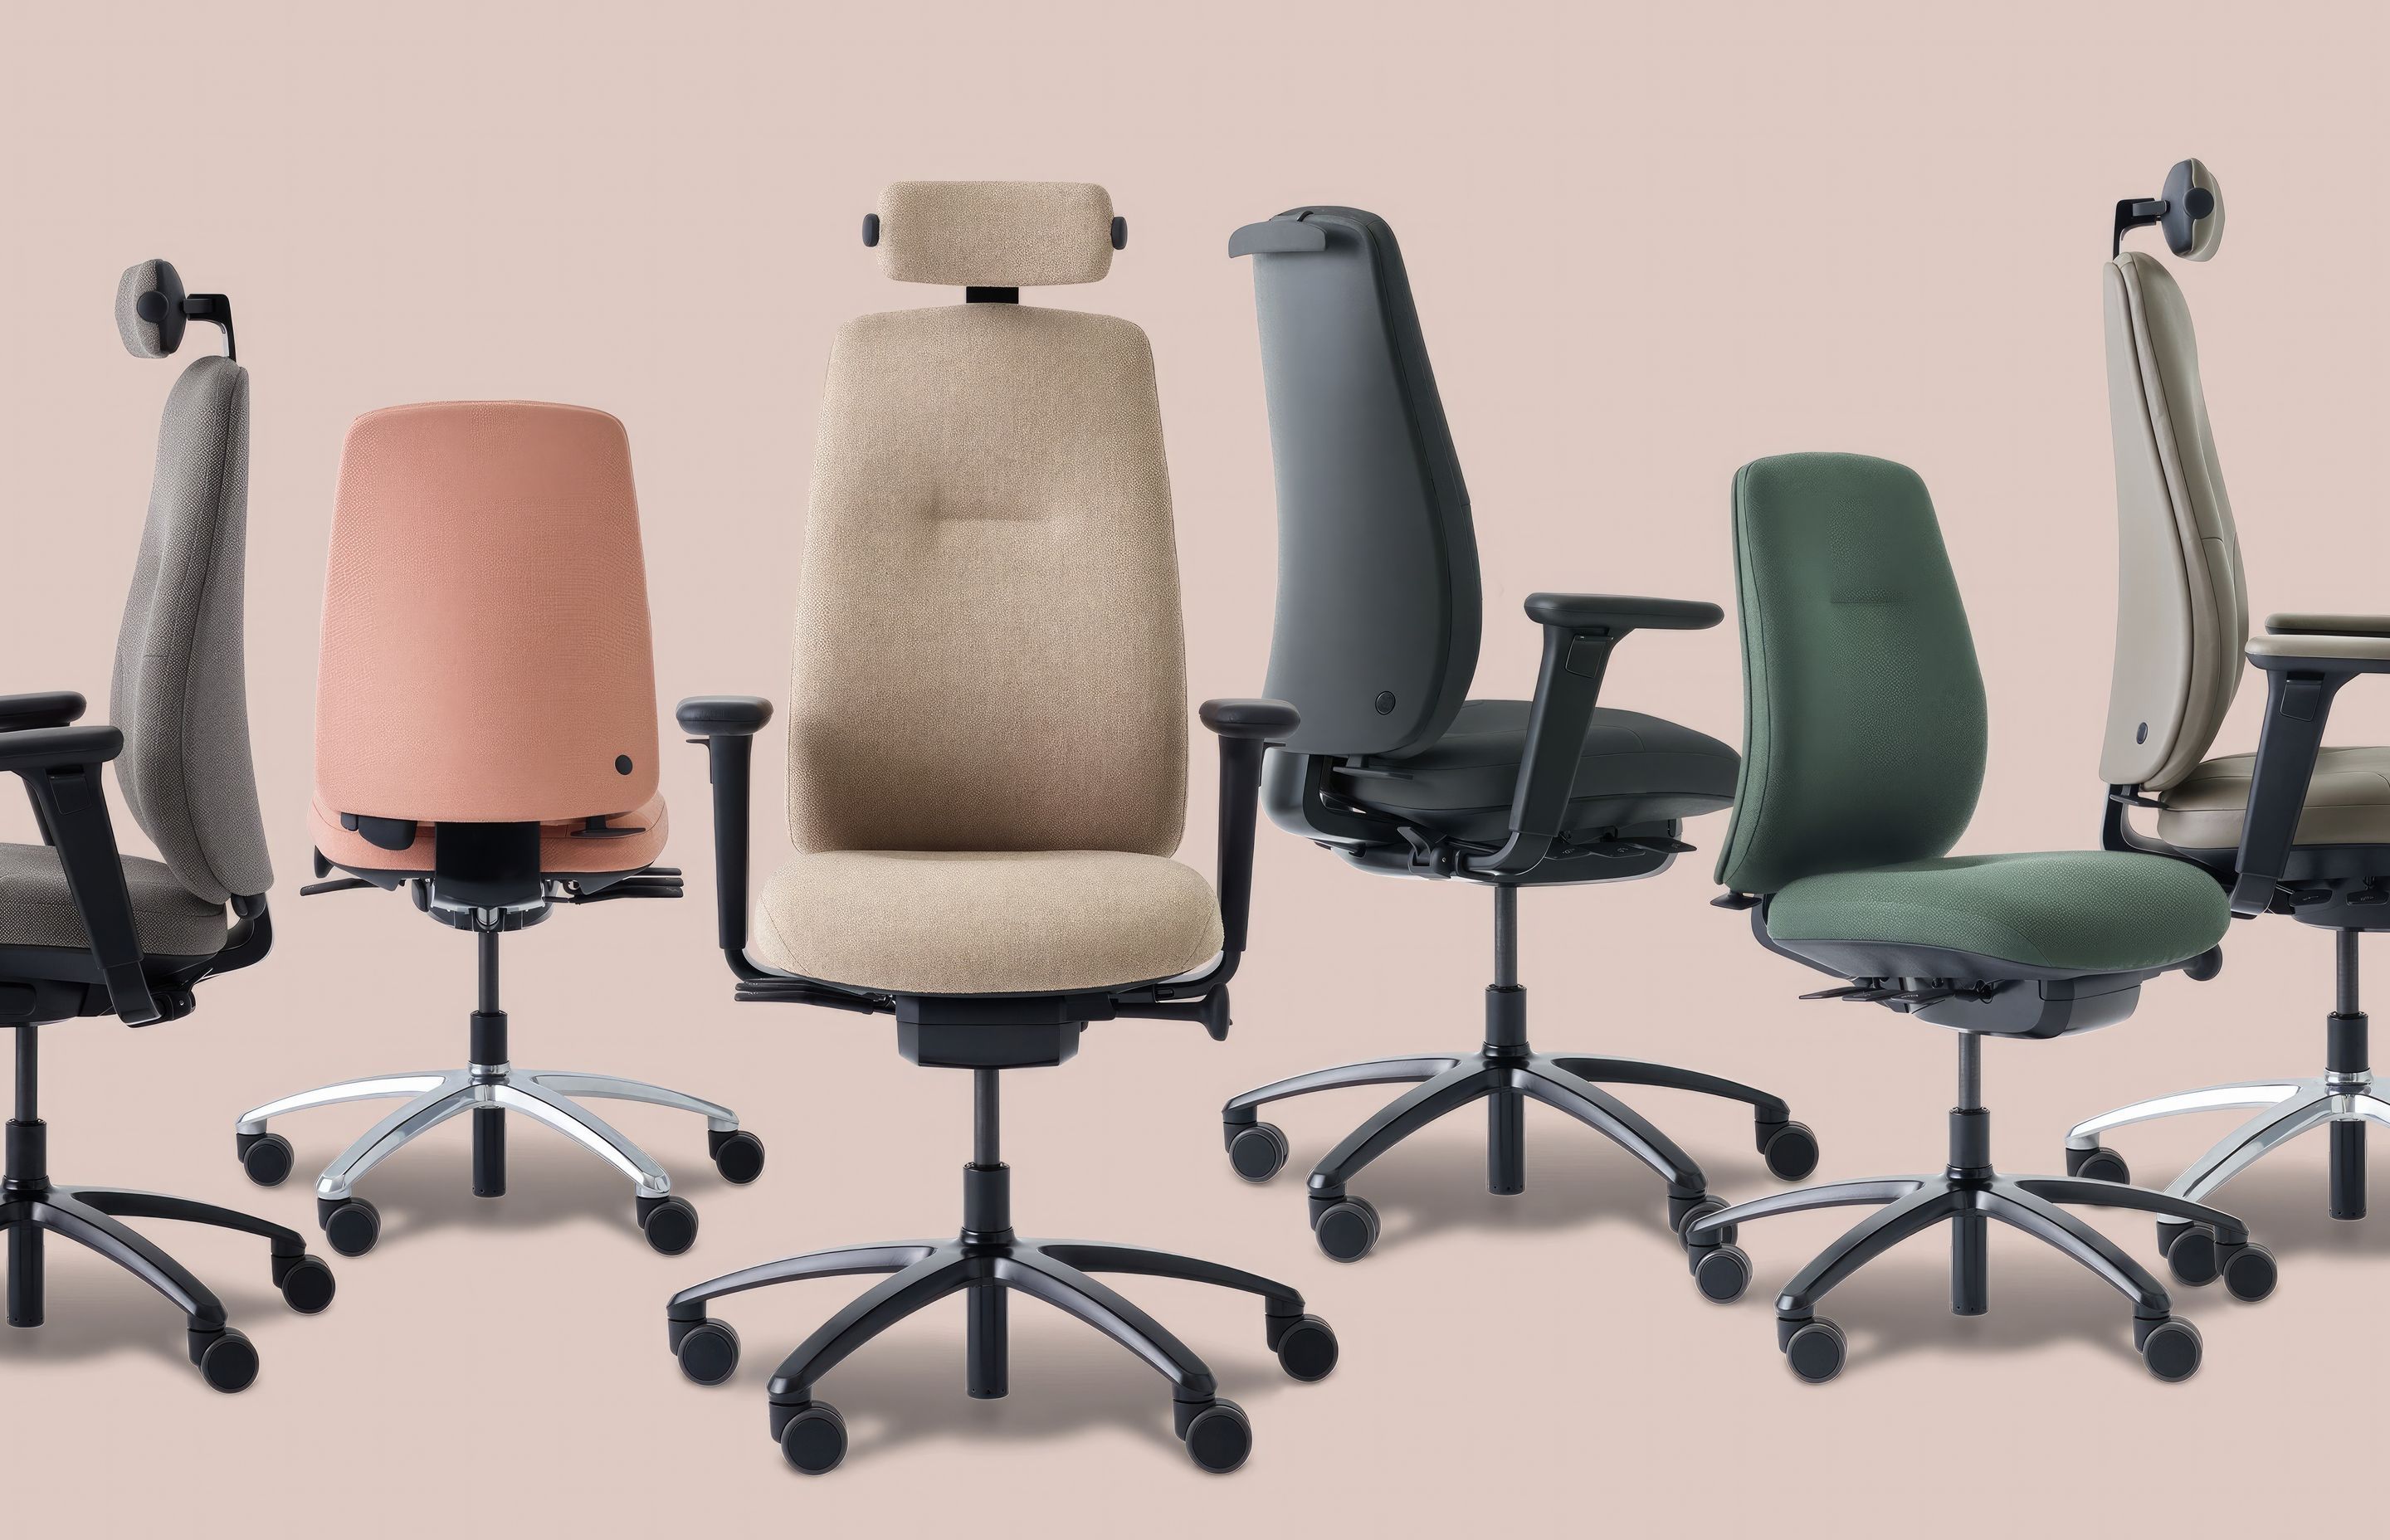 The RH Logic is a series of chairs available in a range of sizes, fully adjustable to suit every individual need